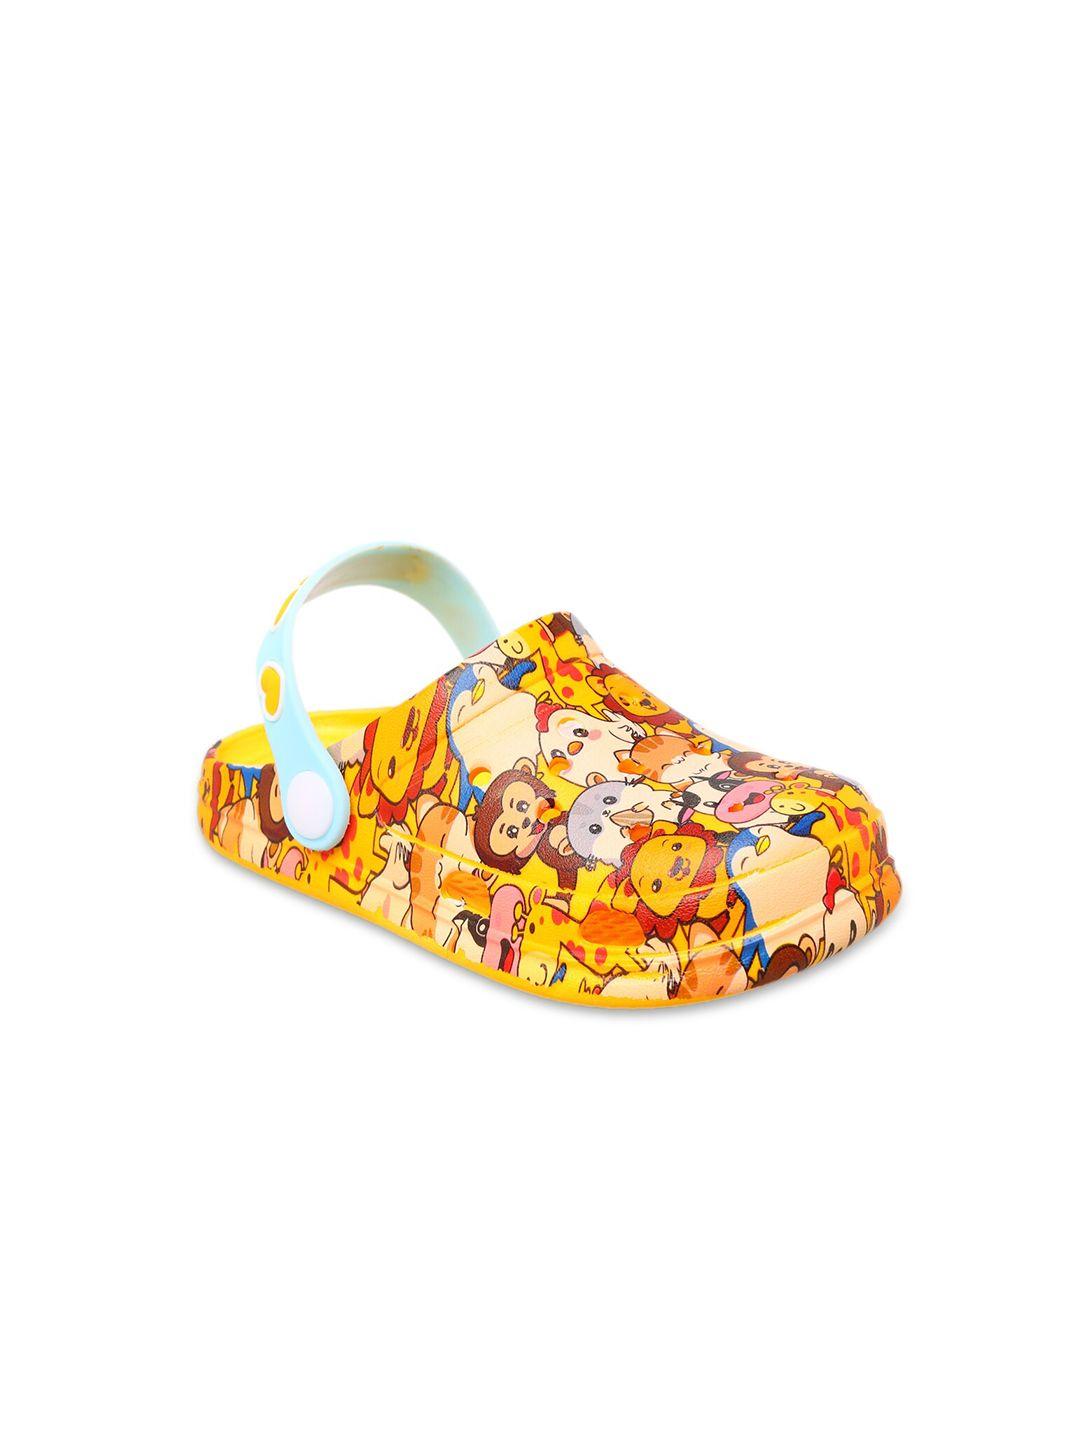 yellow bee boys yellow & brown clogs sandals